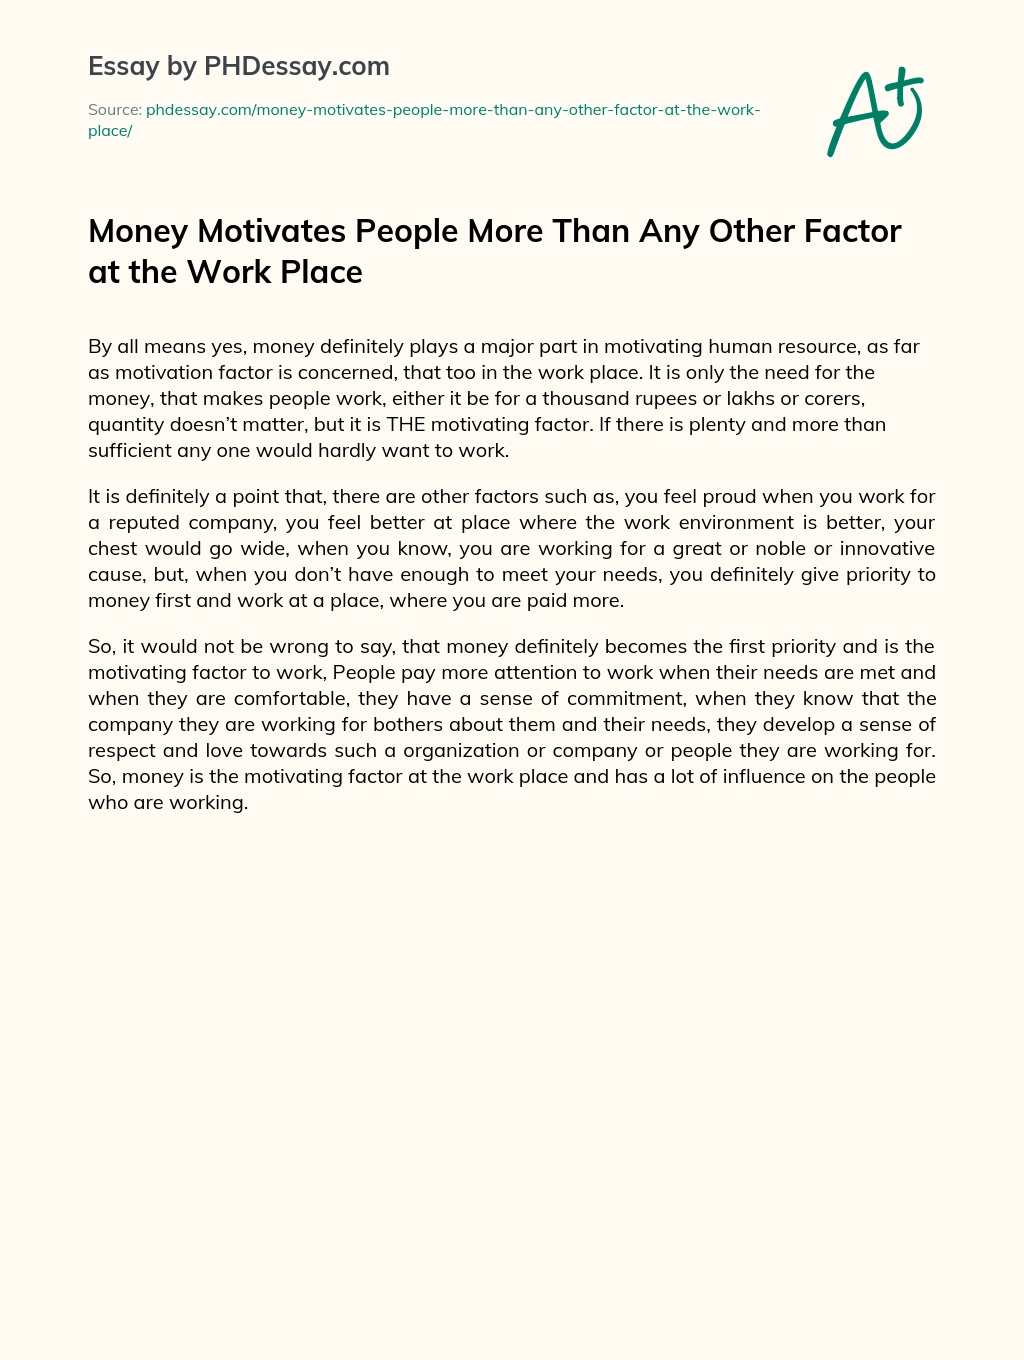 Money Motivates People More Than Any Other Factor at the Work Place essay